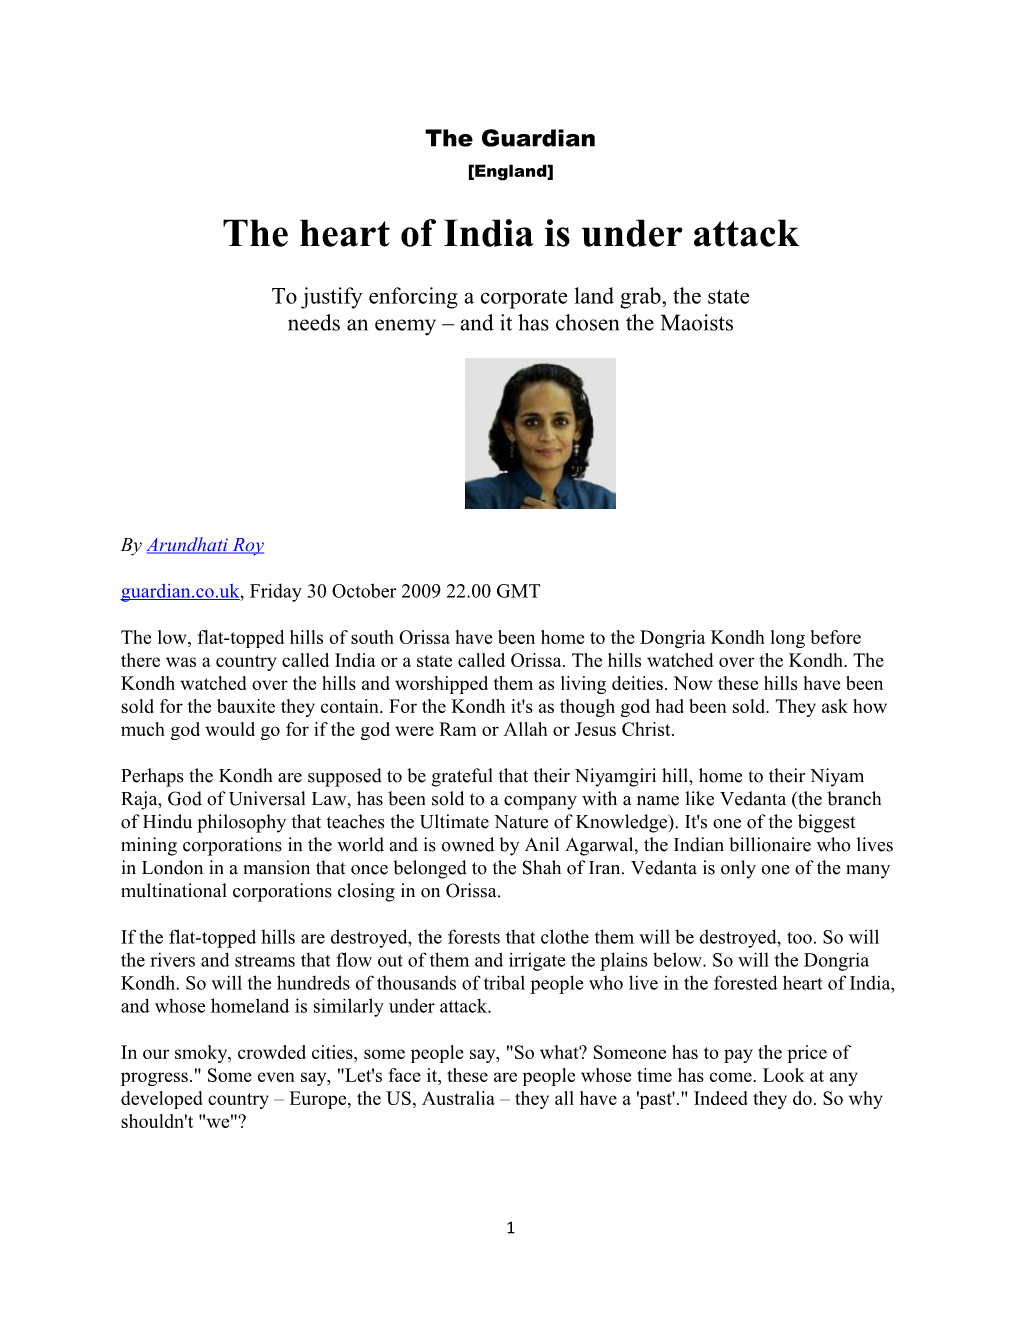 The Heart of India Is Under Attack